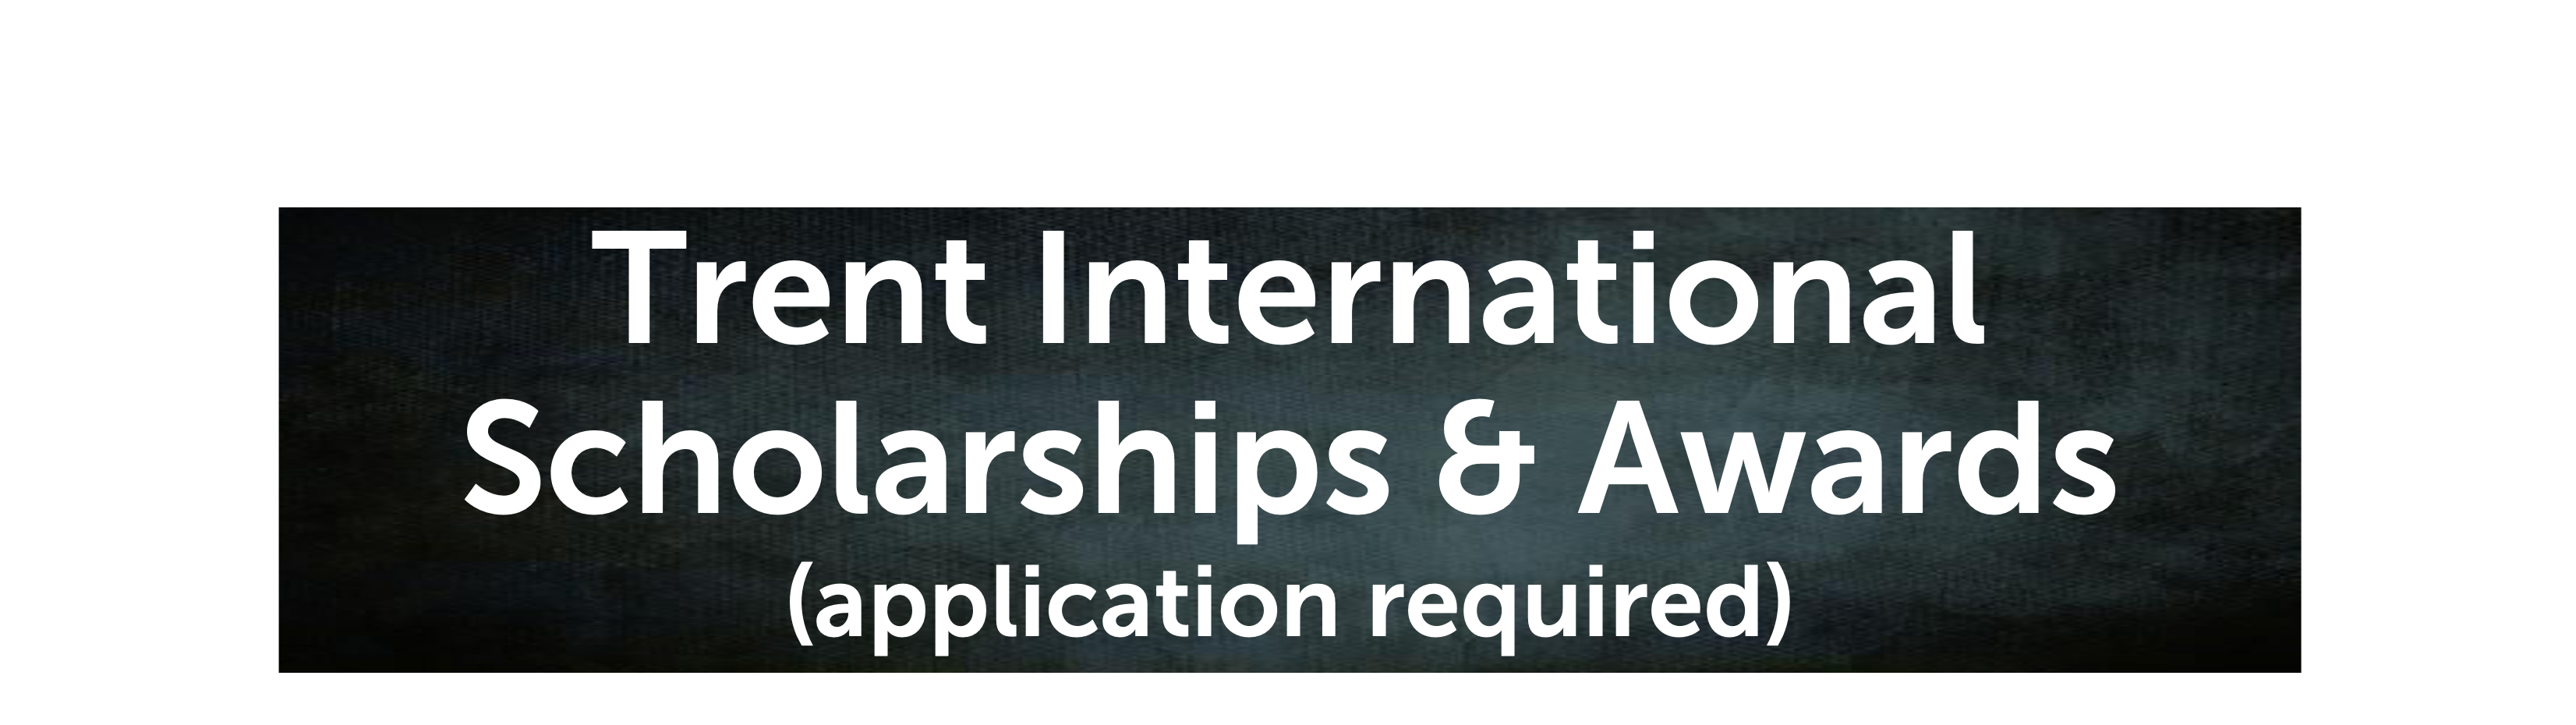 International Scholarships & Awards (application required)